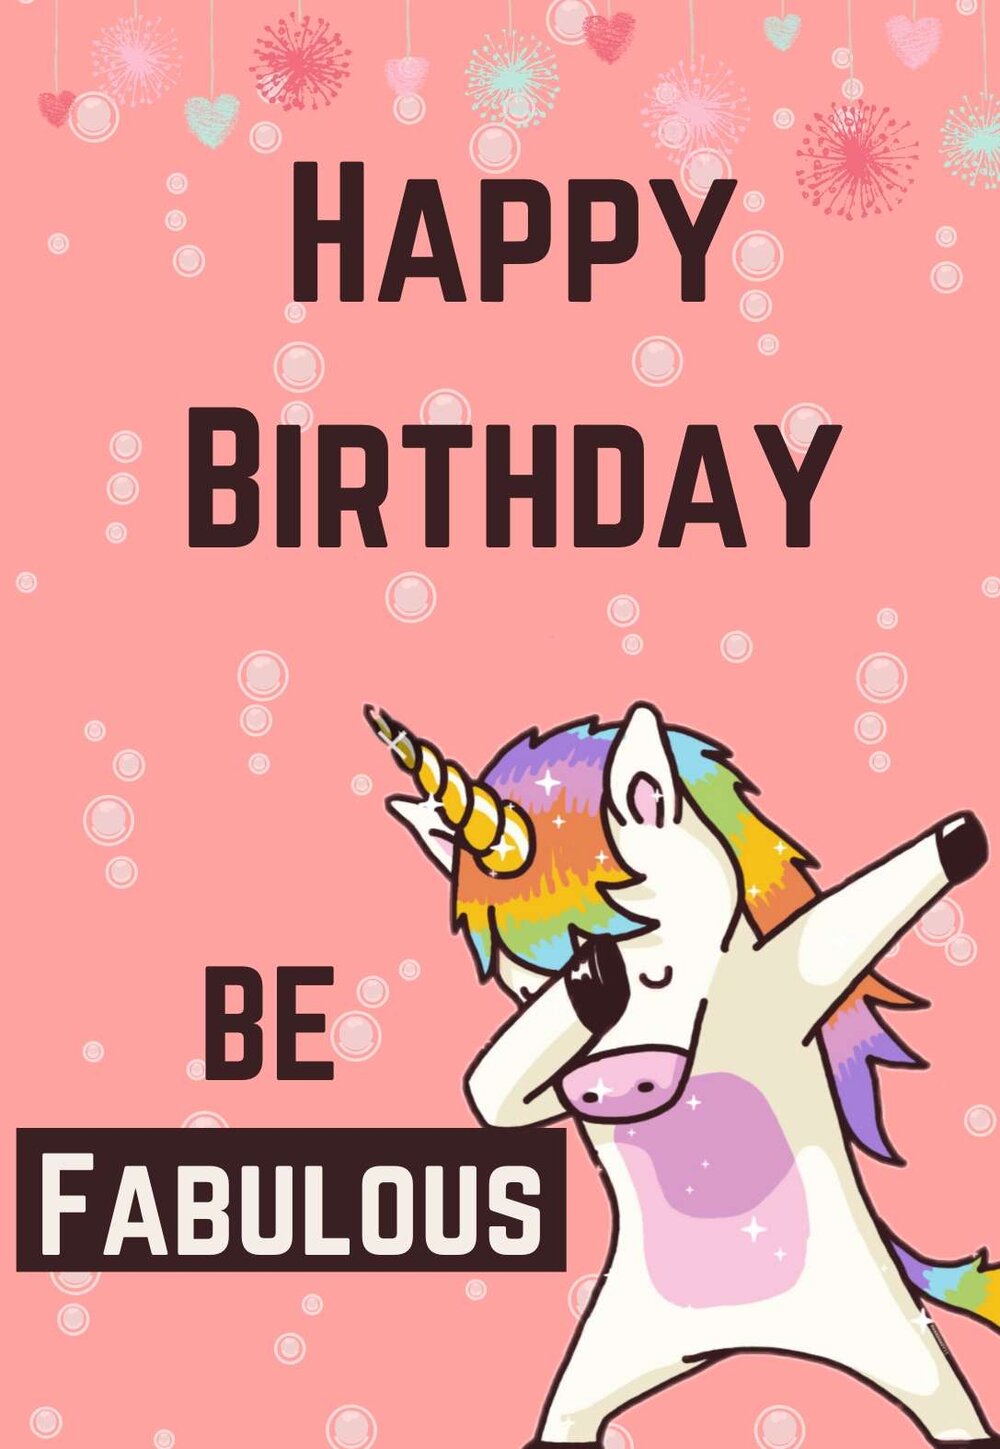 KIDS UNICORN BIRTHDAY CARDS PERSONALISED with any AGE RELATIONSHIP /& NAME